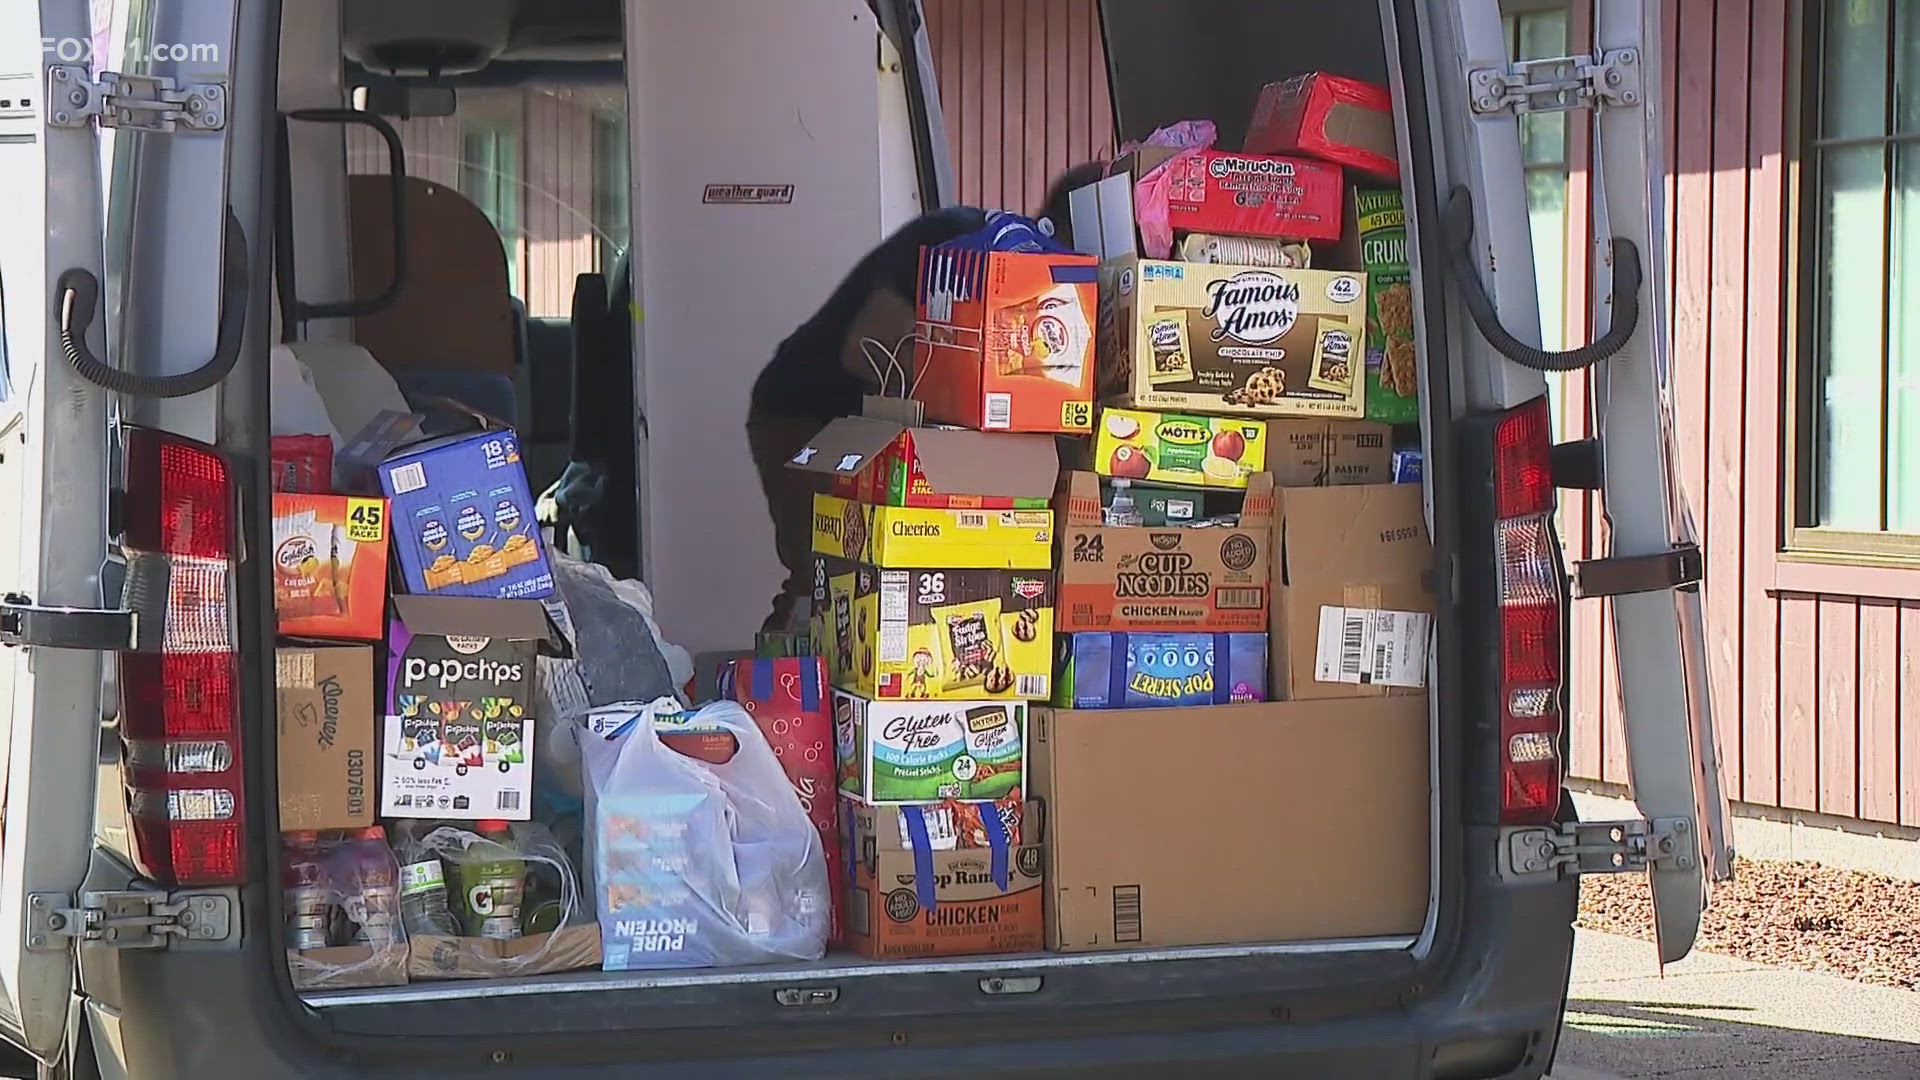 Students at Quinnipiac are stepping up to stop hunger by donating more than four tons of food to feed people in need all across the state.